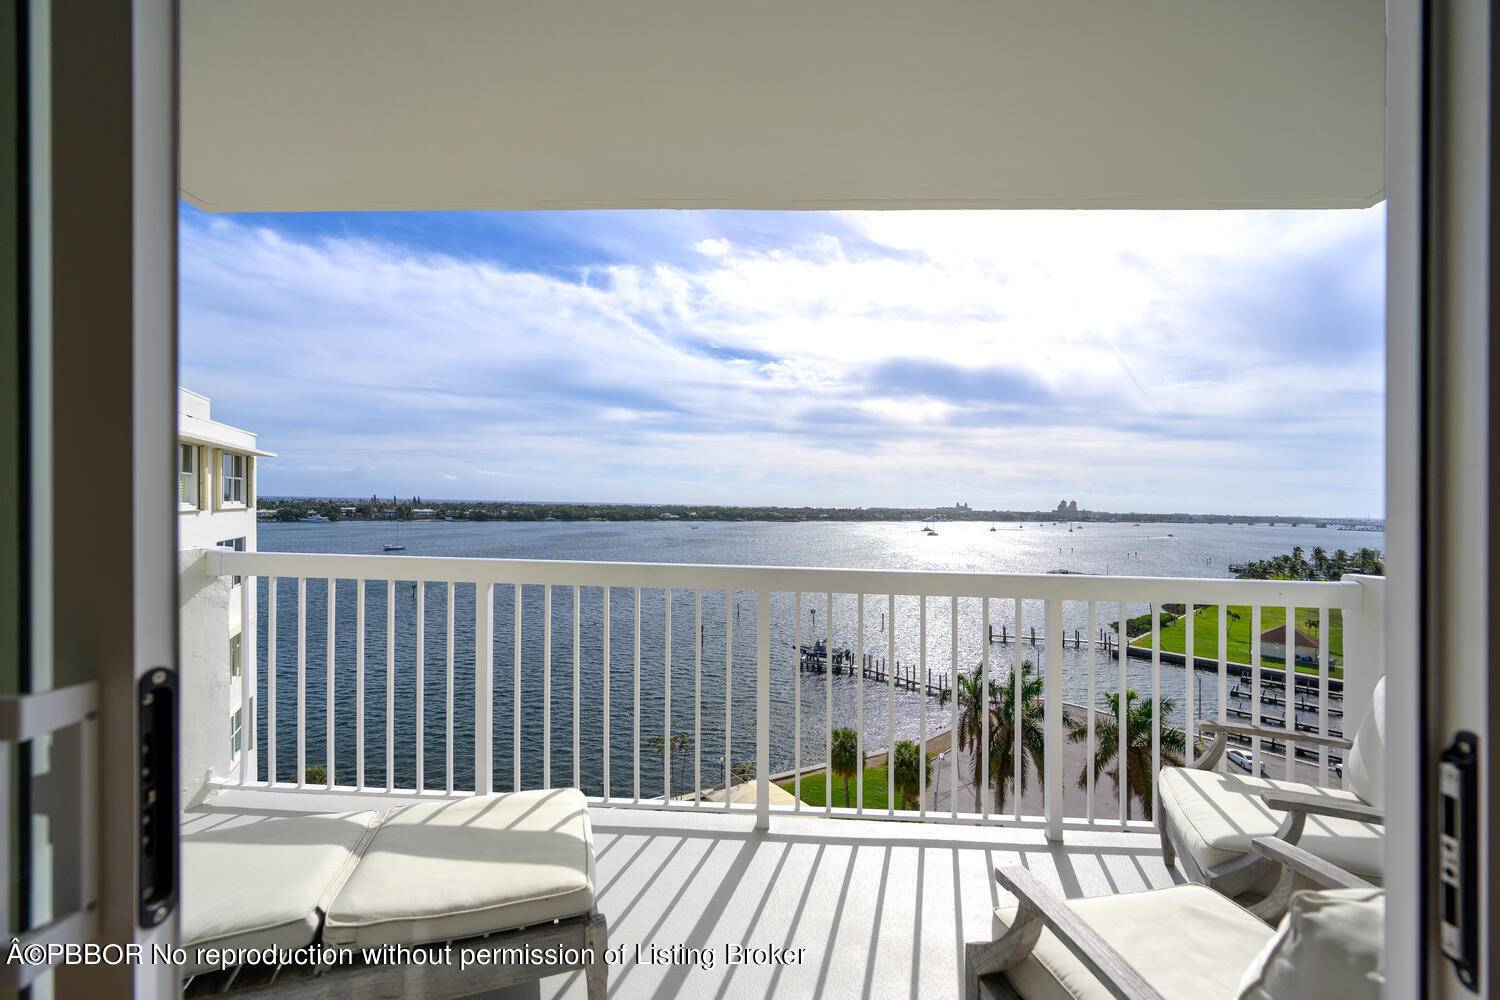 This spectacular 2 2 directly on the intra coastal waterway.